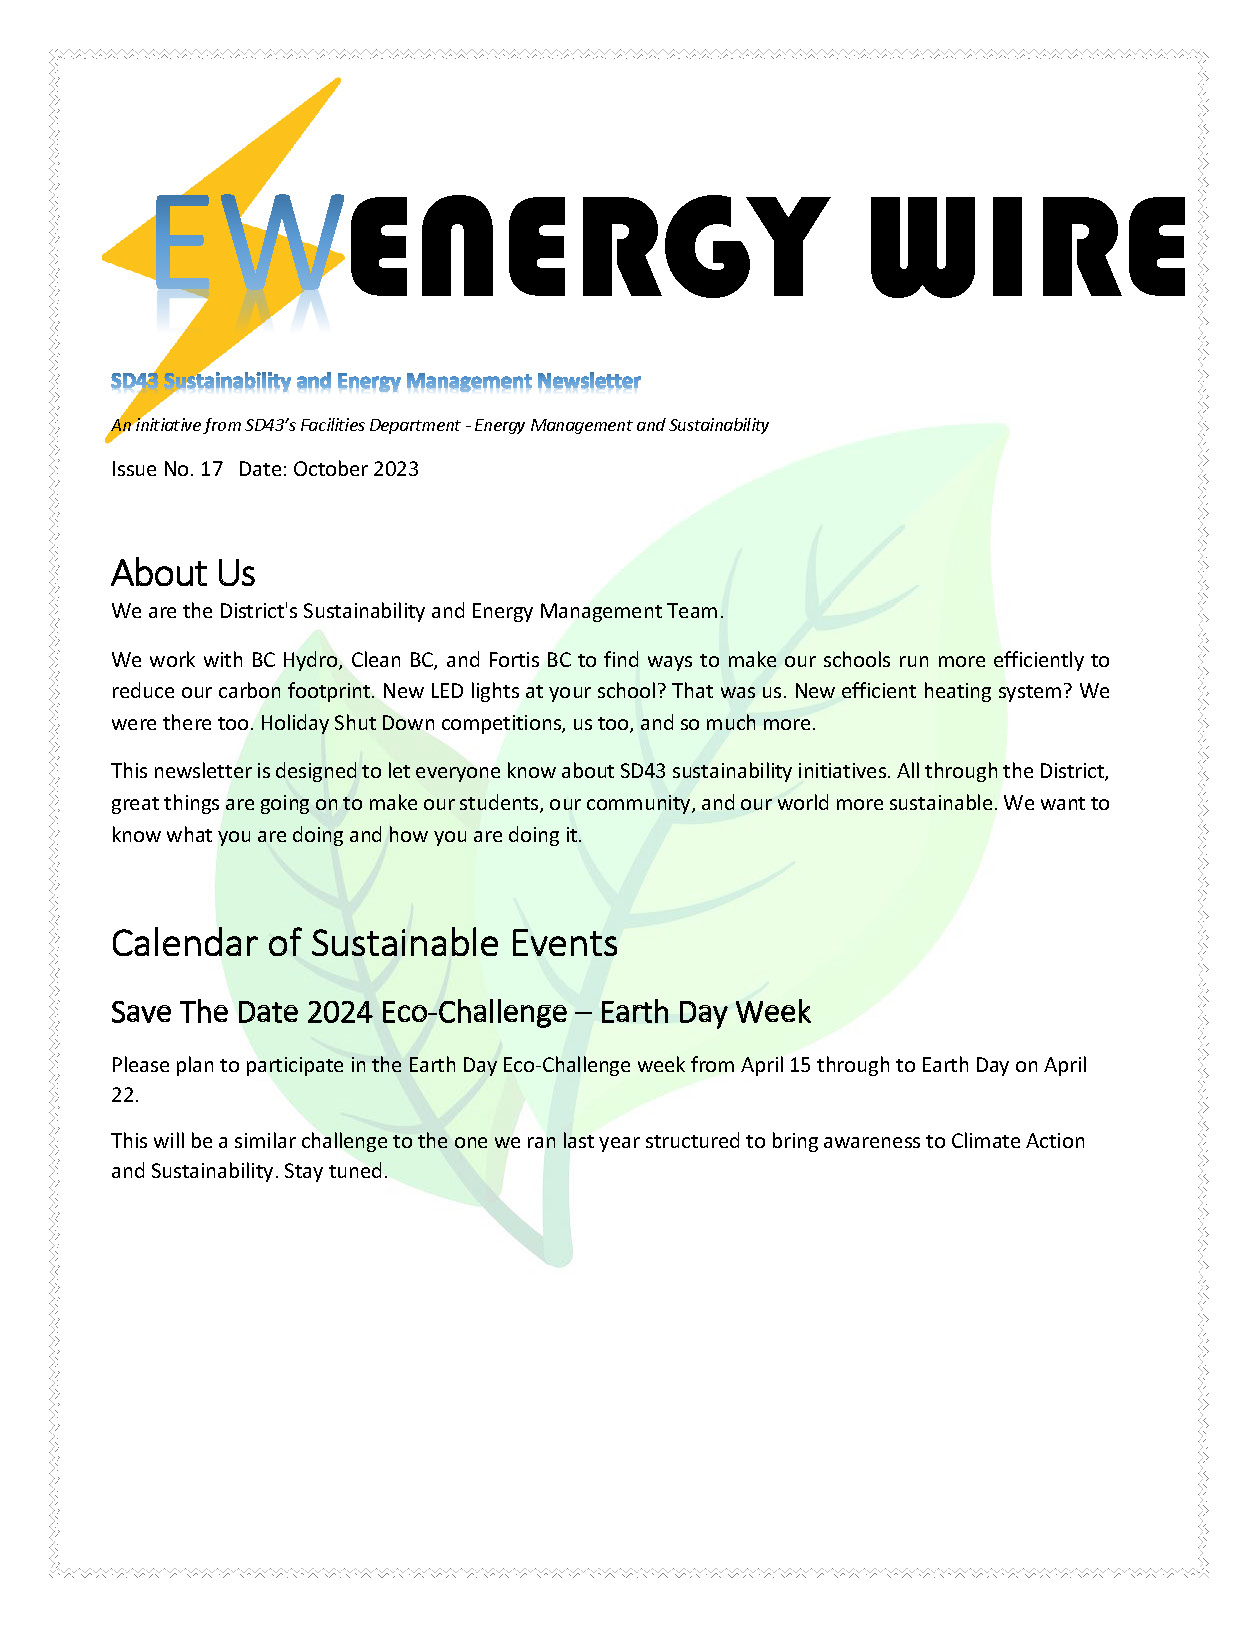 Energy Wire Newsletter October 2023_Page_1.jpg